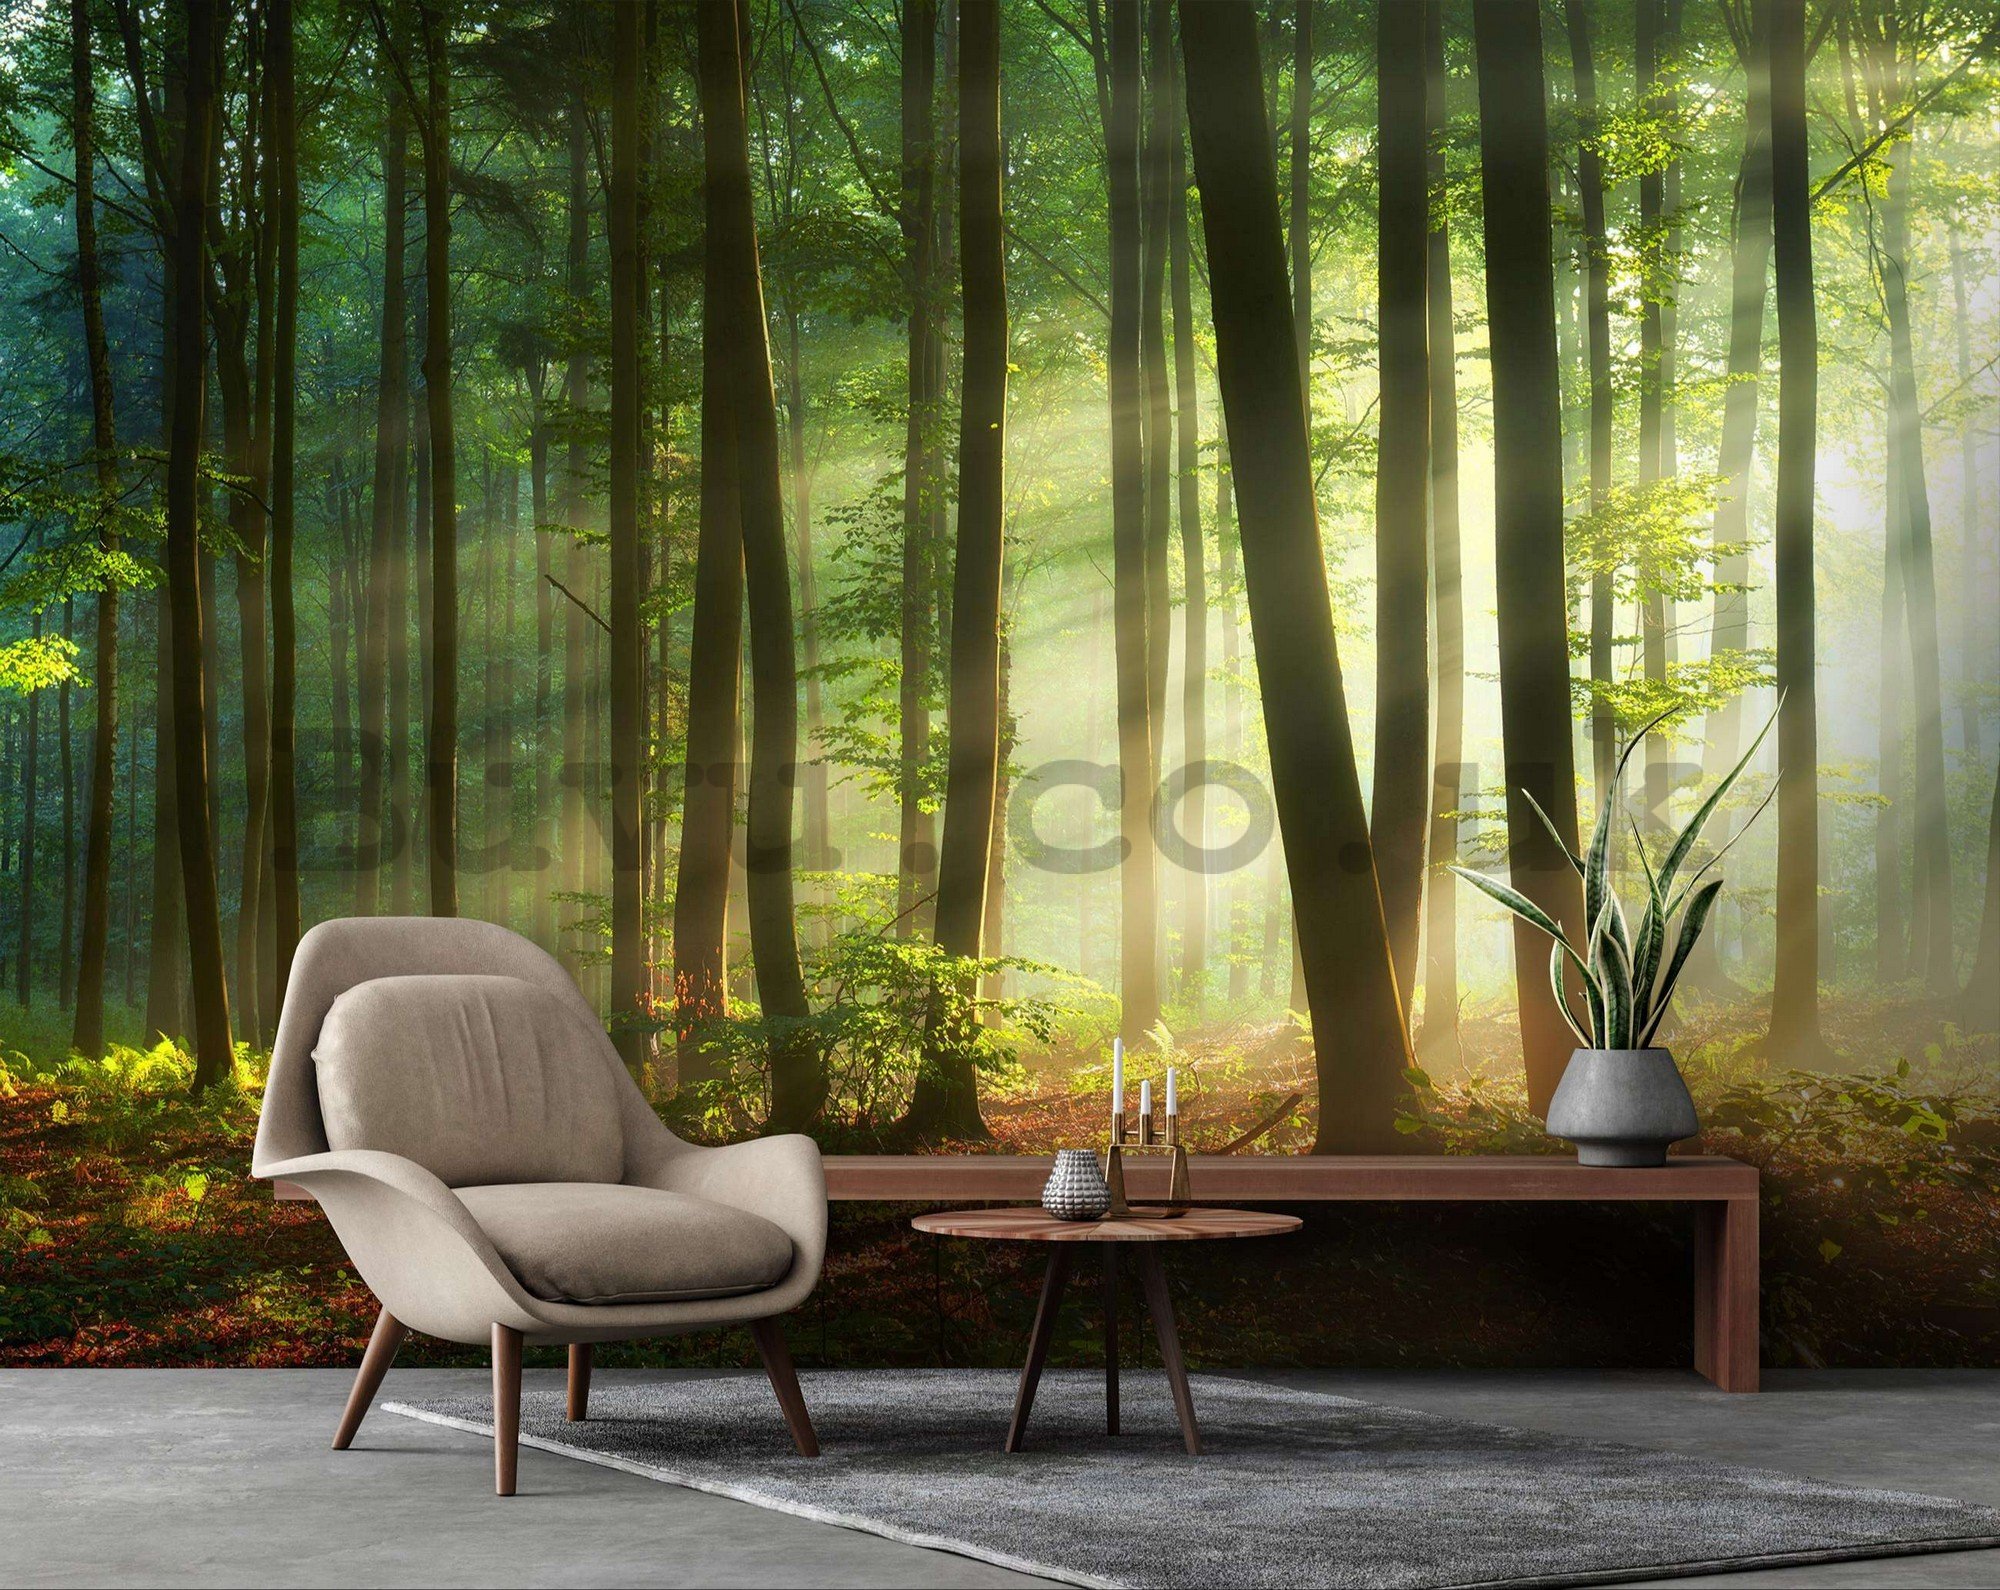 Wall mural vlies: Sunrise in the forest - 416x254 cm